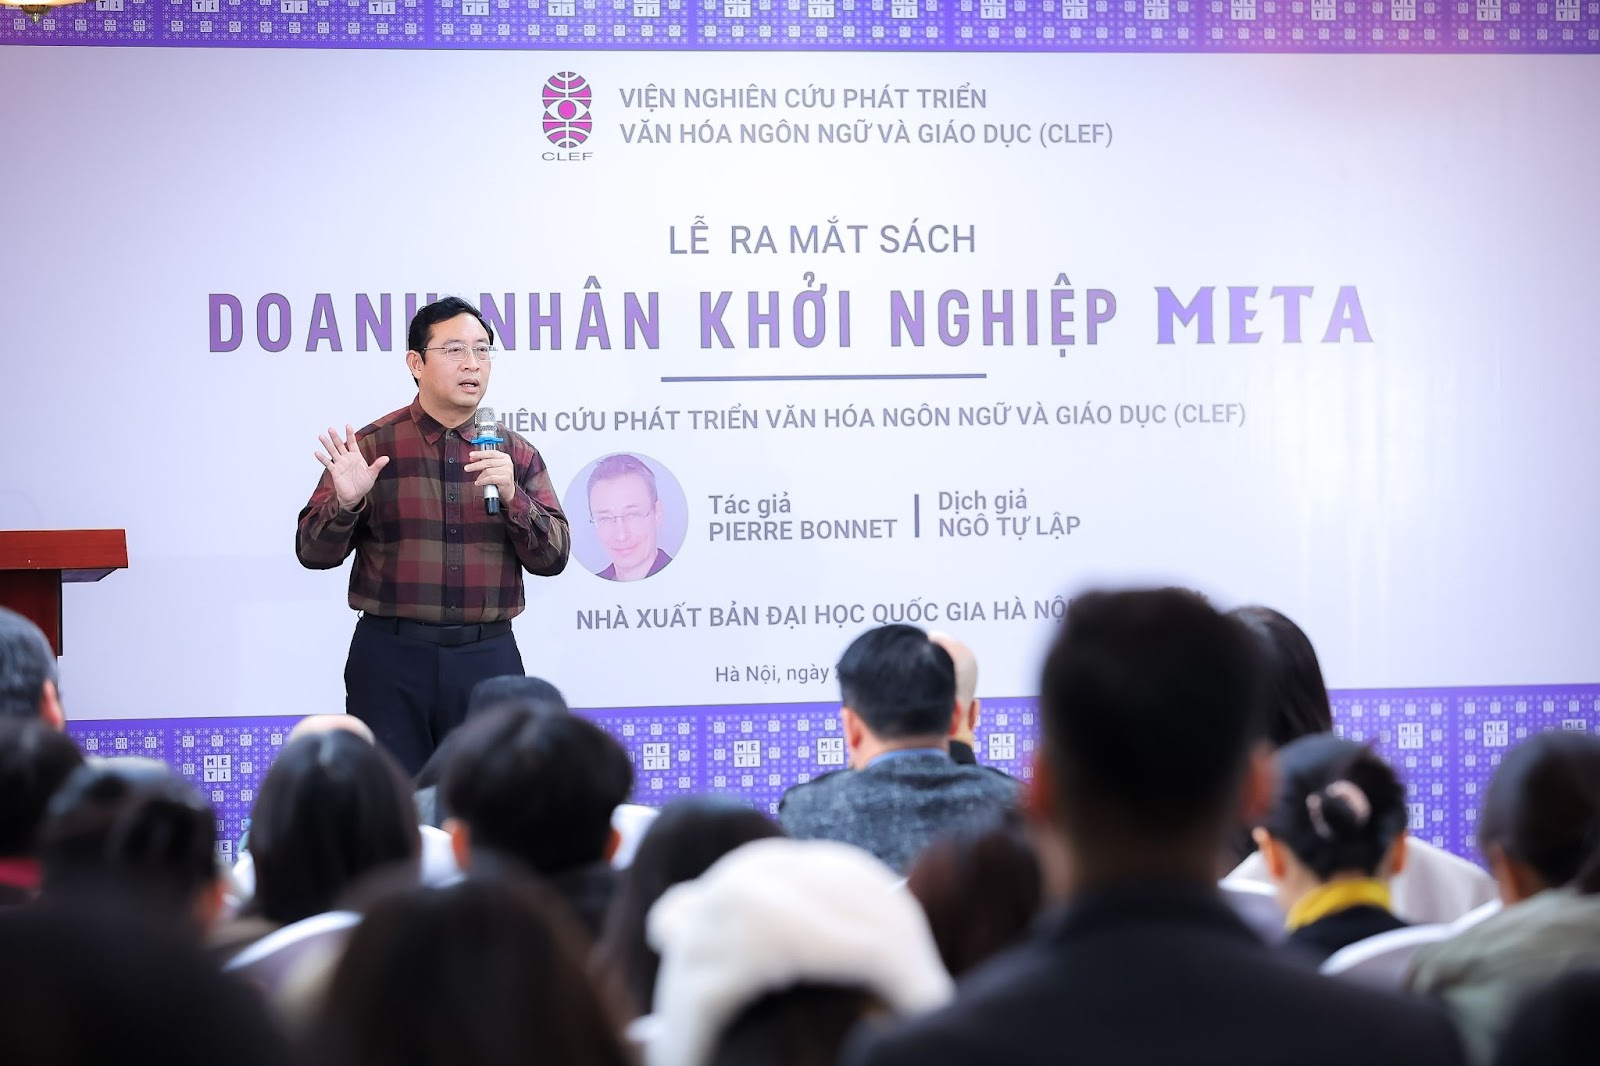 Mr. Phạm Hồng Quất, Director of the Market Development and Enterprise Development Department, Ministry of Science and Technology, shared his thoughts on the book.